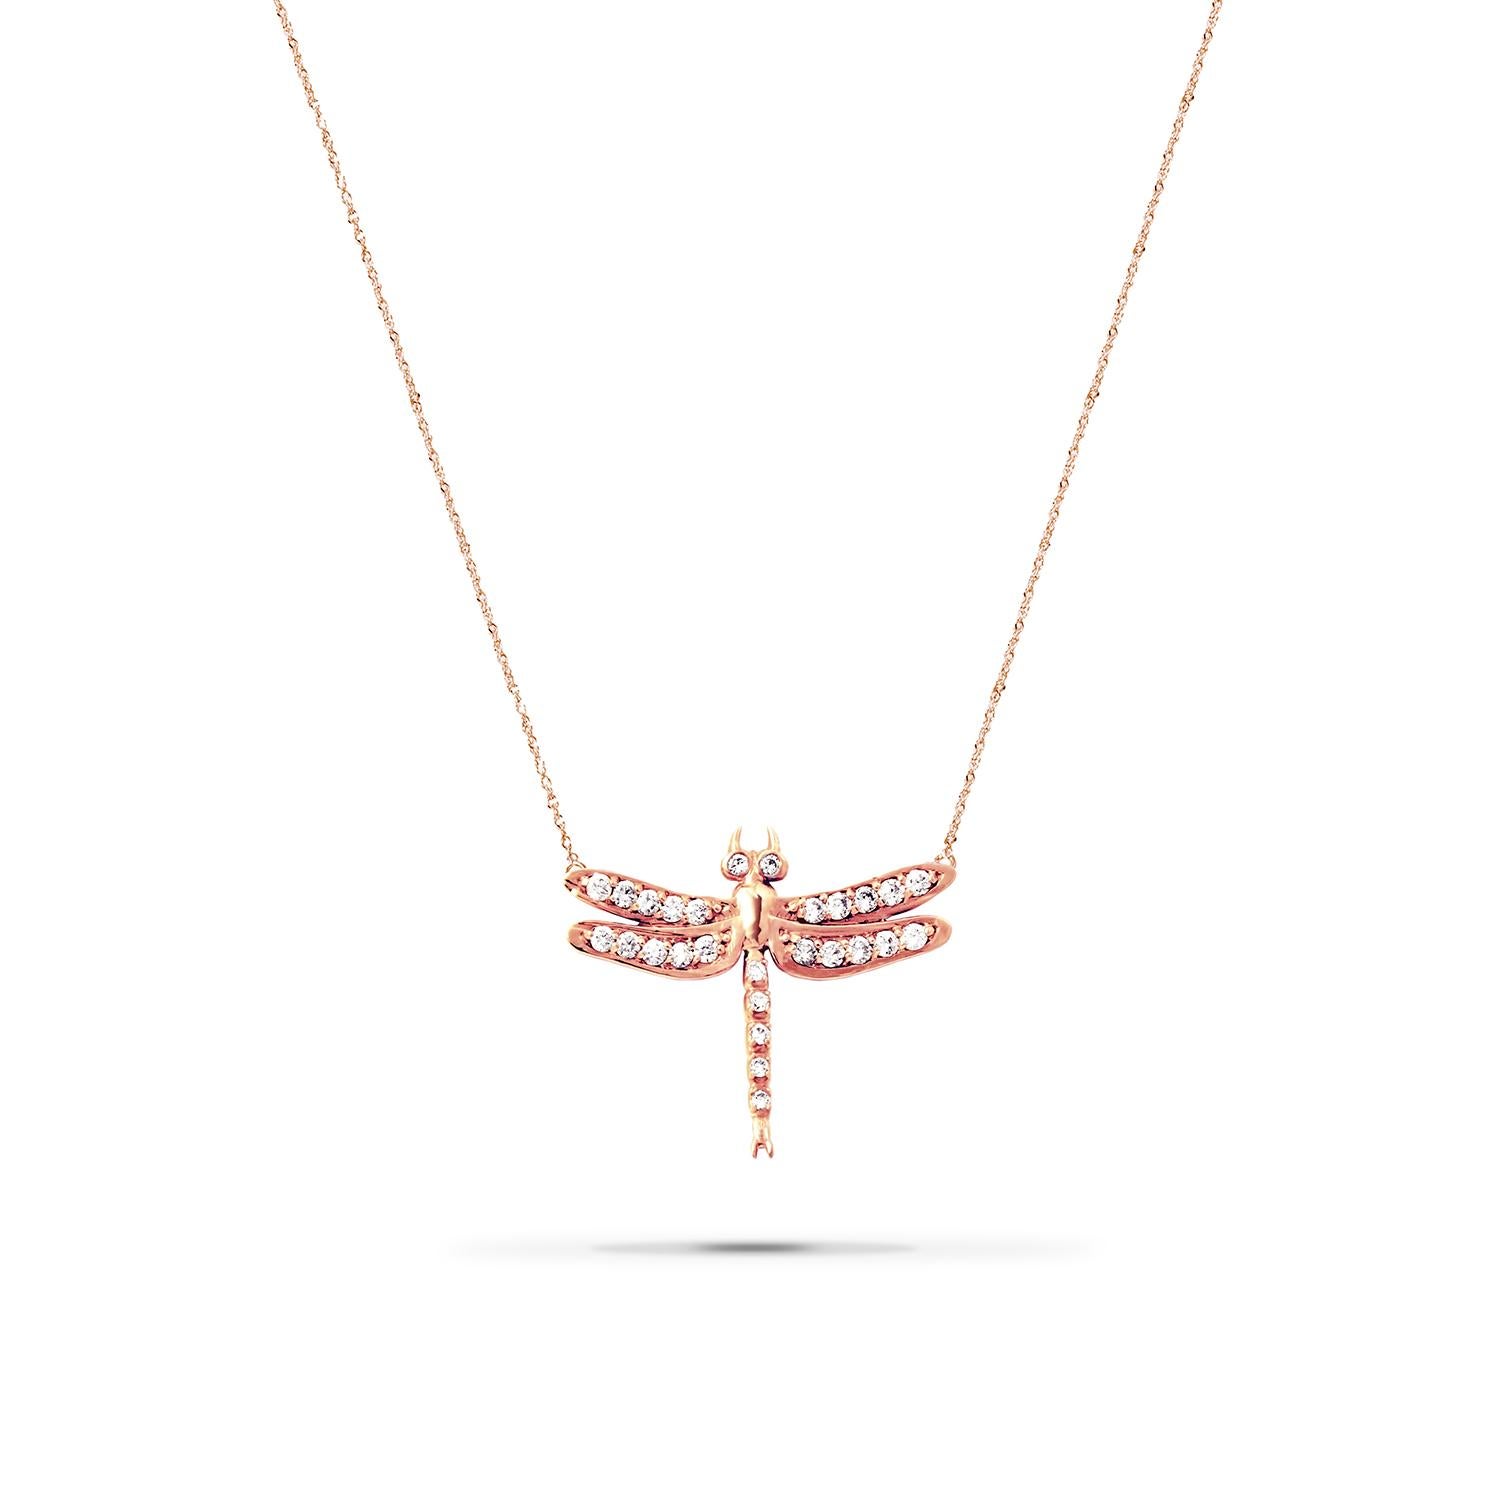 Small Dragonfly Diamond Necklace / Rose Gold For Sale 2